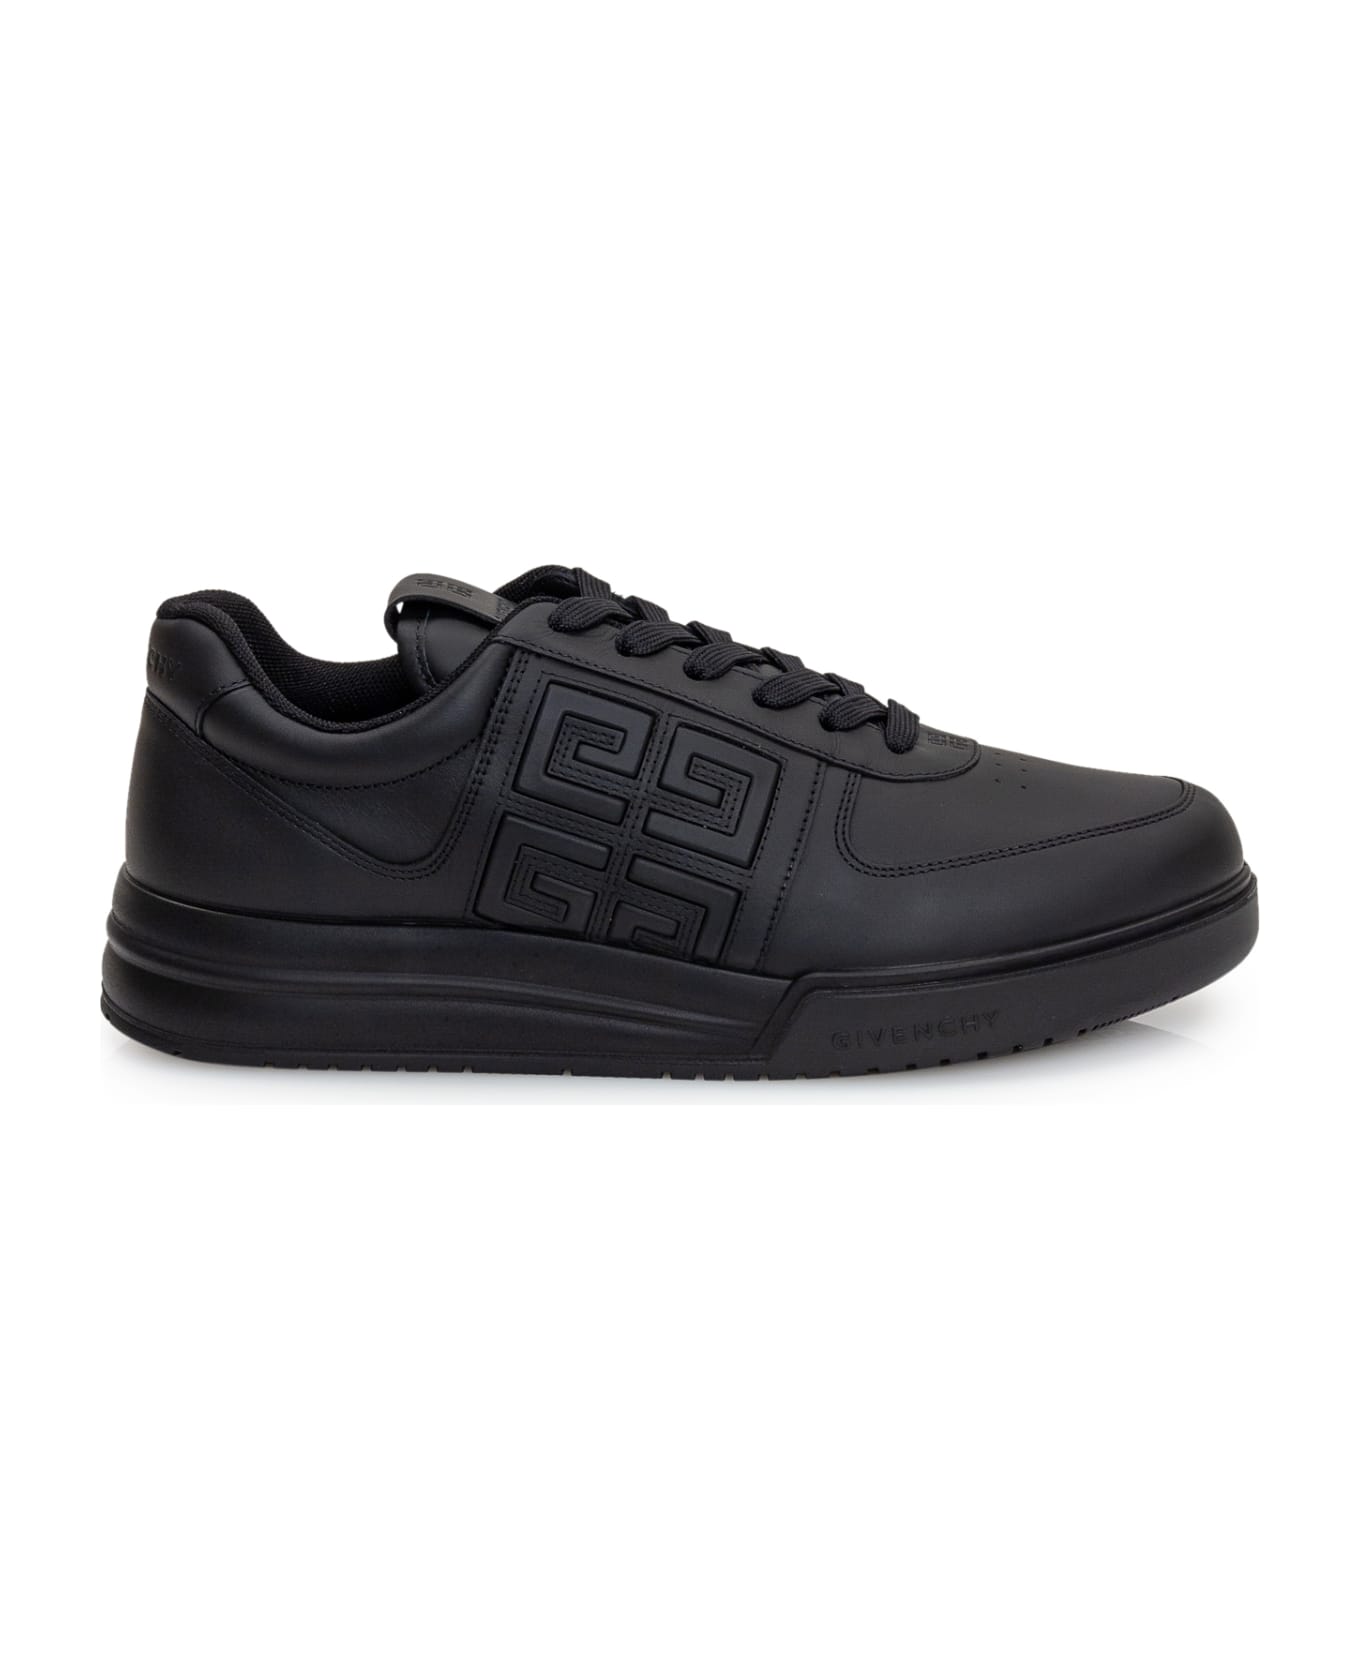 Givenchy G4 Low Sneakers - Black